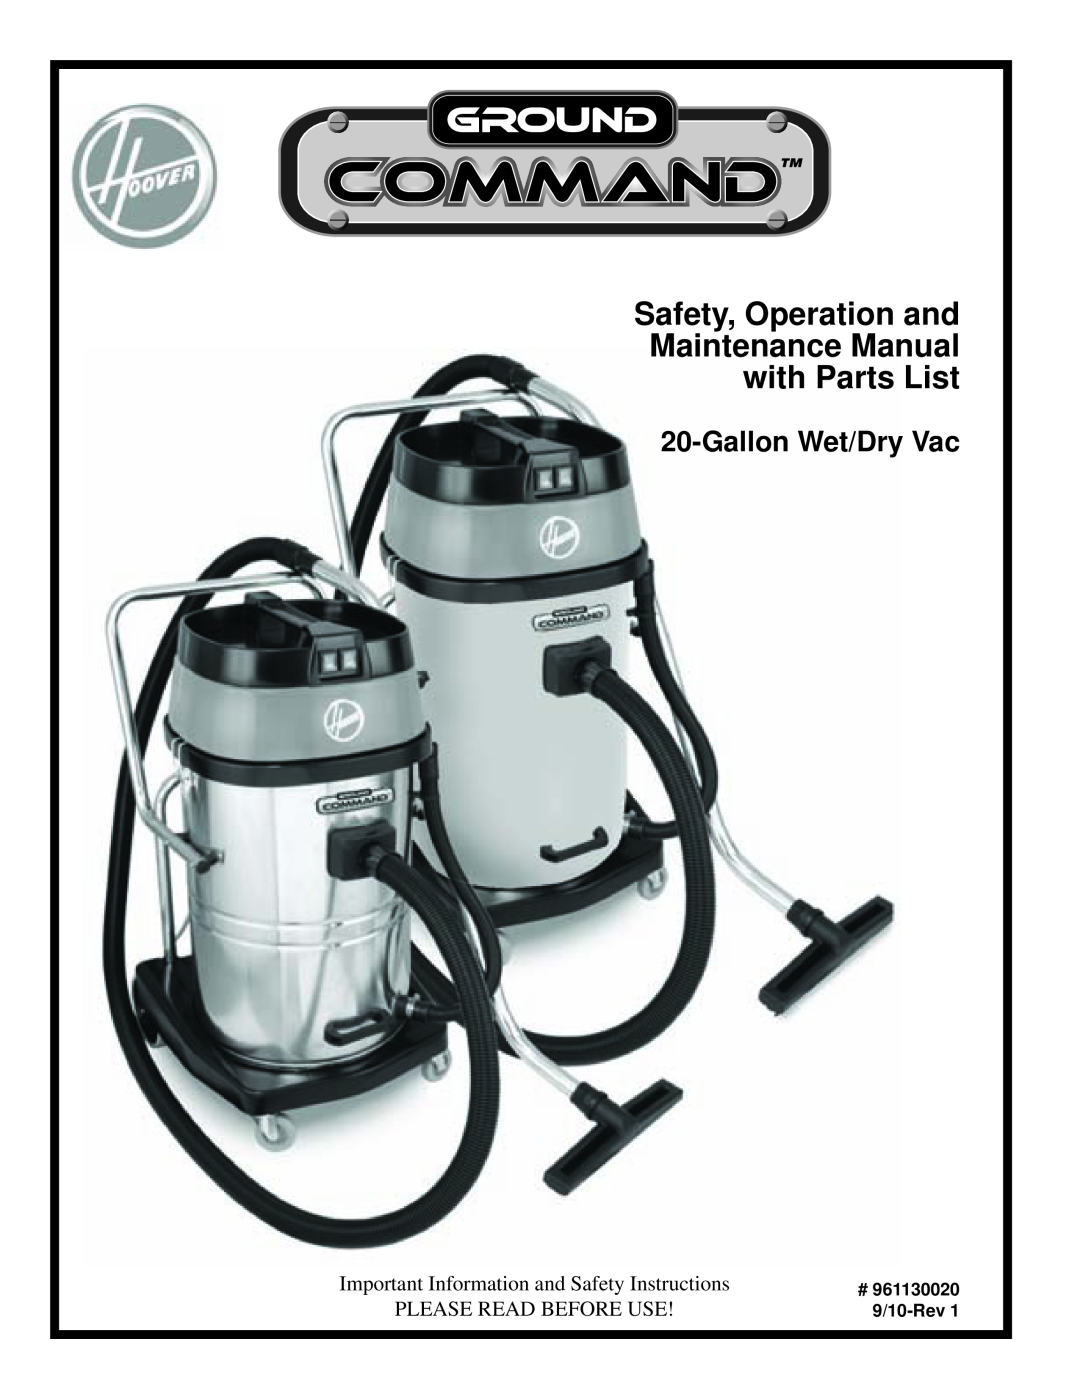 Hoover manual Safety, Operation and Maintenance Manual with Parts List, Gallon Wet/Dry Vac, # 961130020 9/10-Rev 